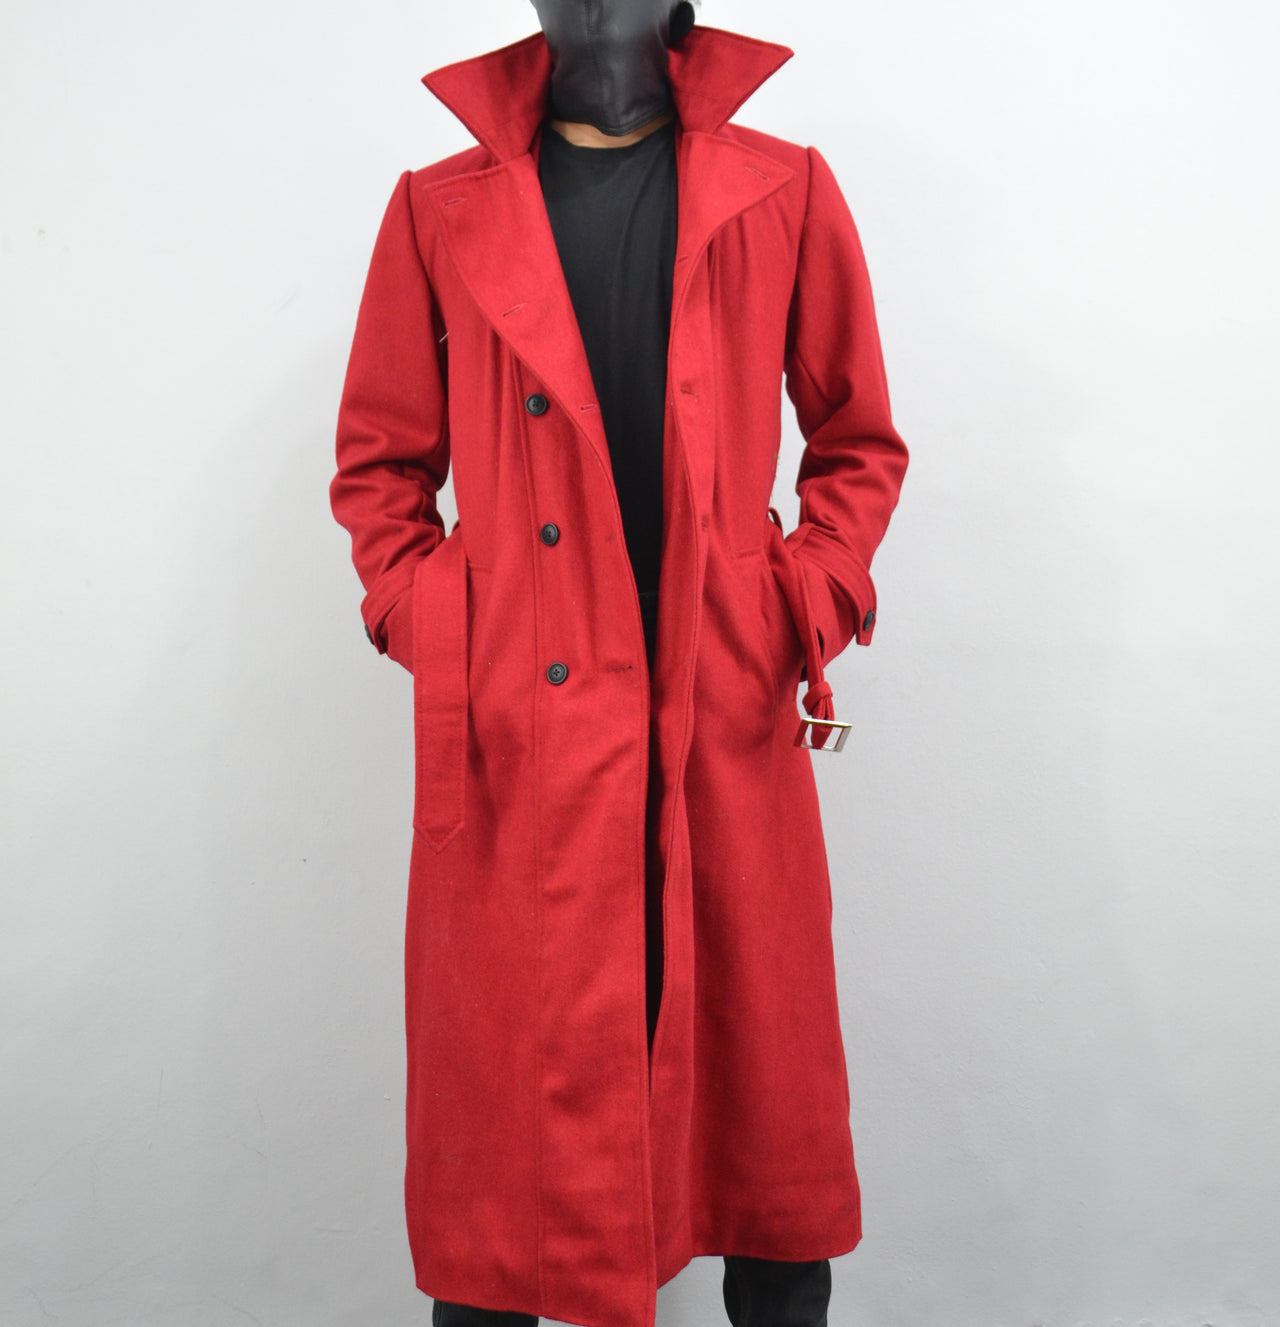 Men's Double-Breasted Red Long Geniune Wool Casual Belted Trench Coat